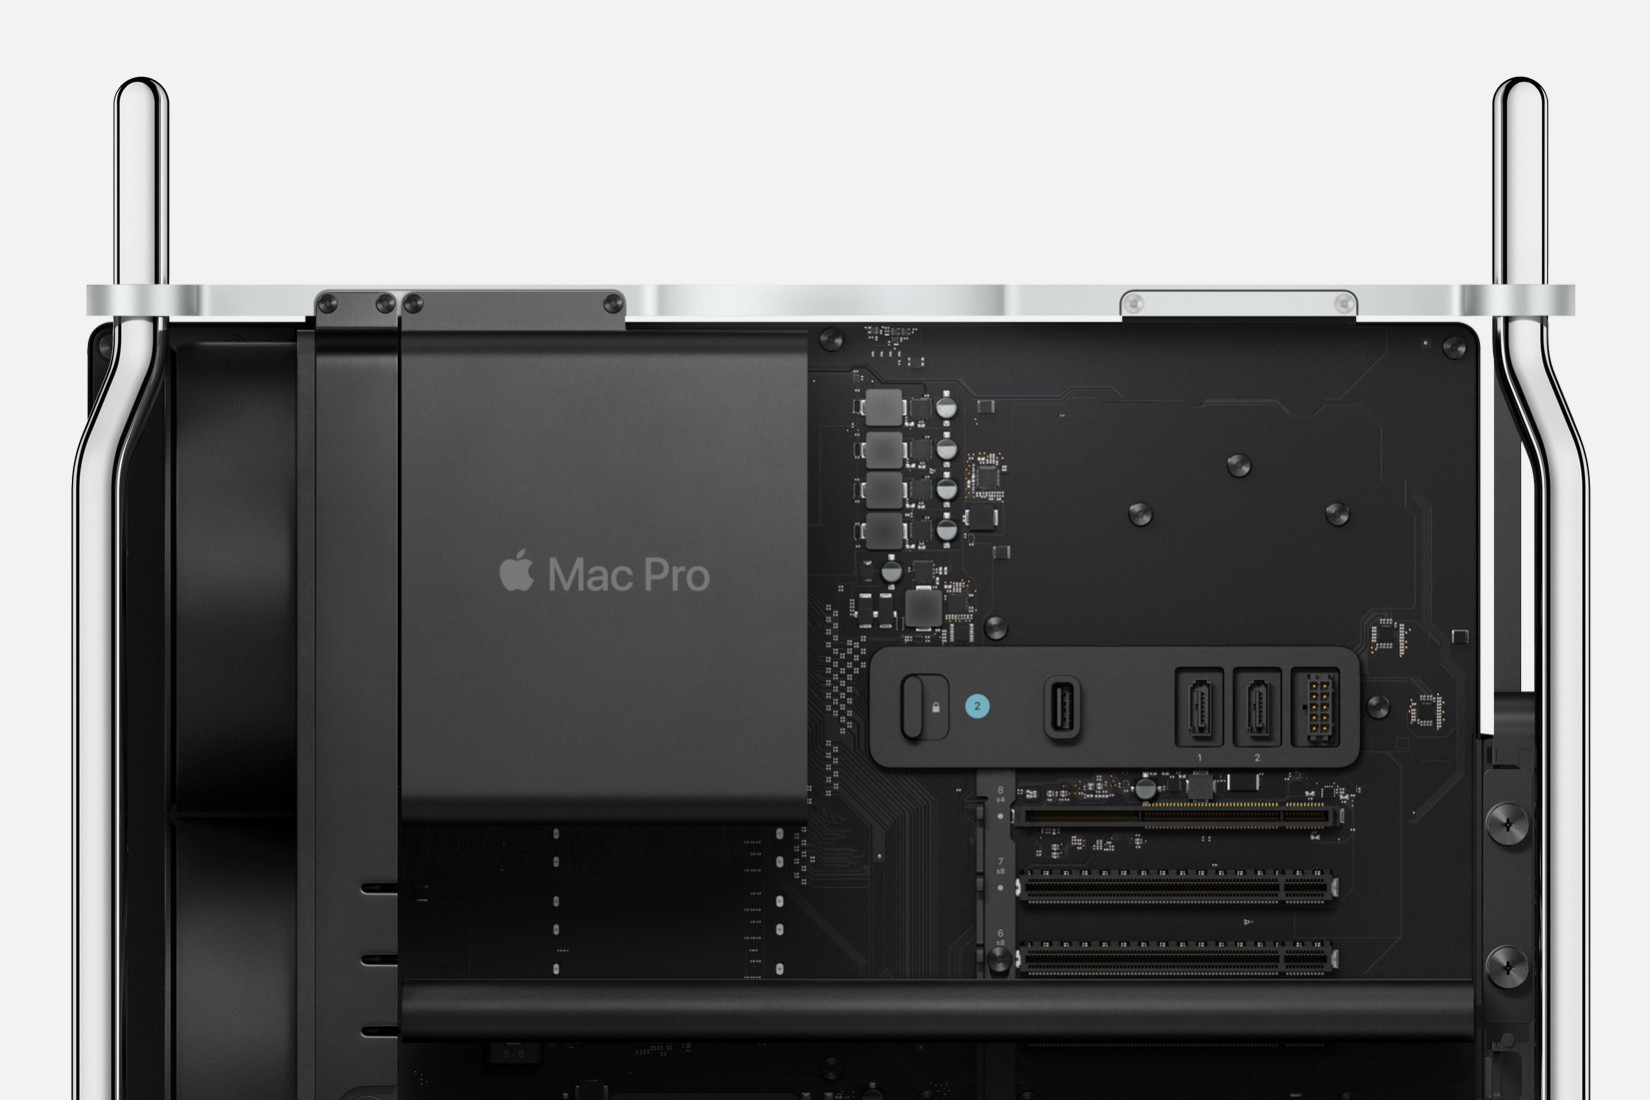 The Mac Pro Afterburner Card: What Is It, and What Does It Do 